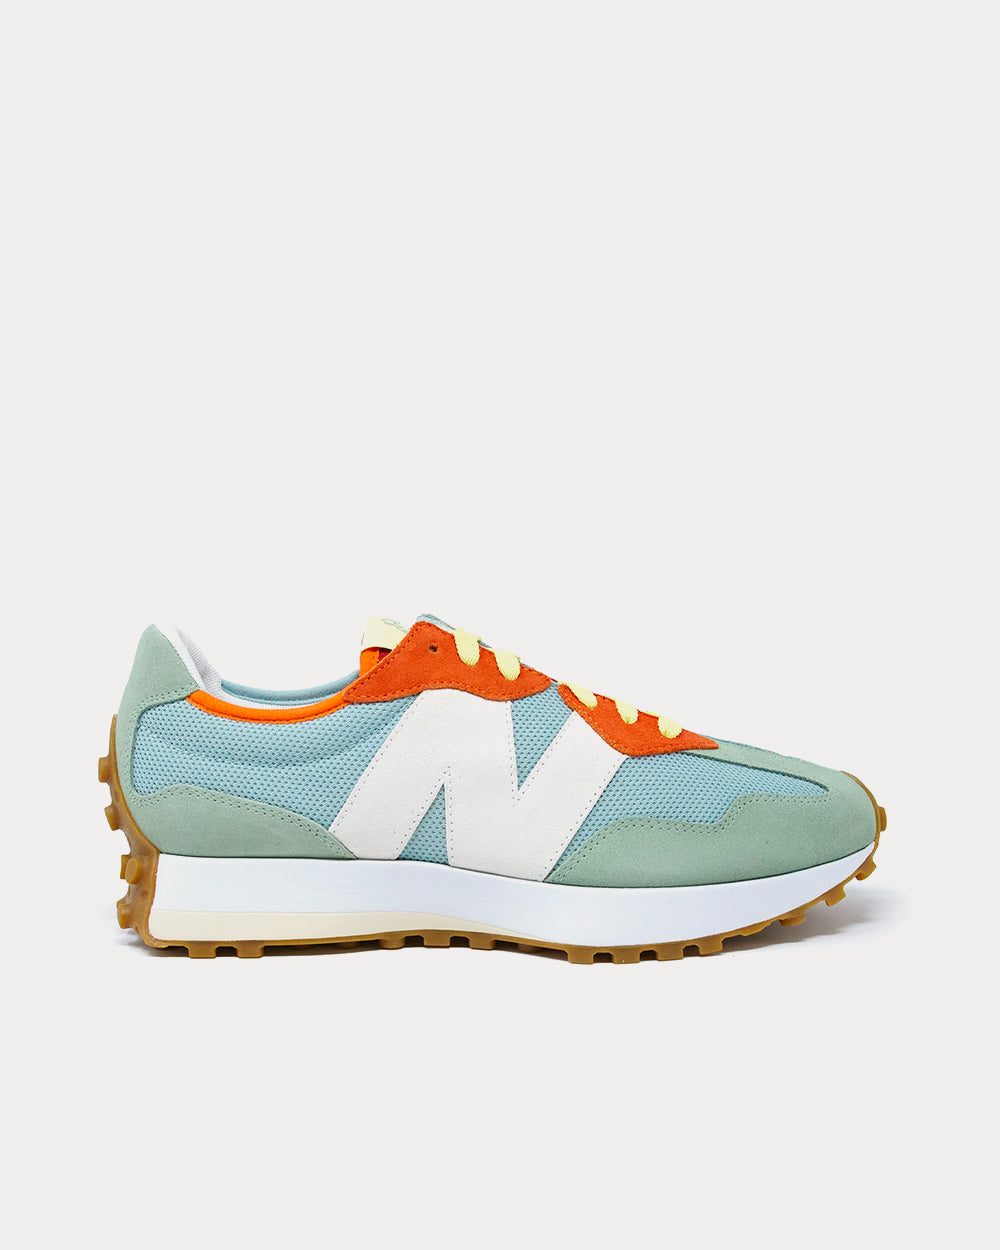 New Balance x Todd Snyder - 327 Pineapple Low Top Sneakers